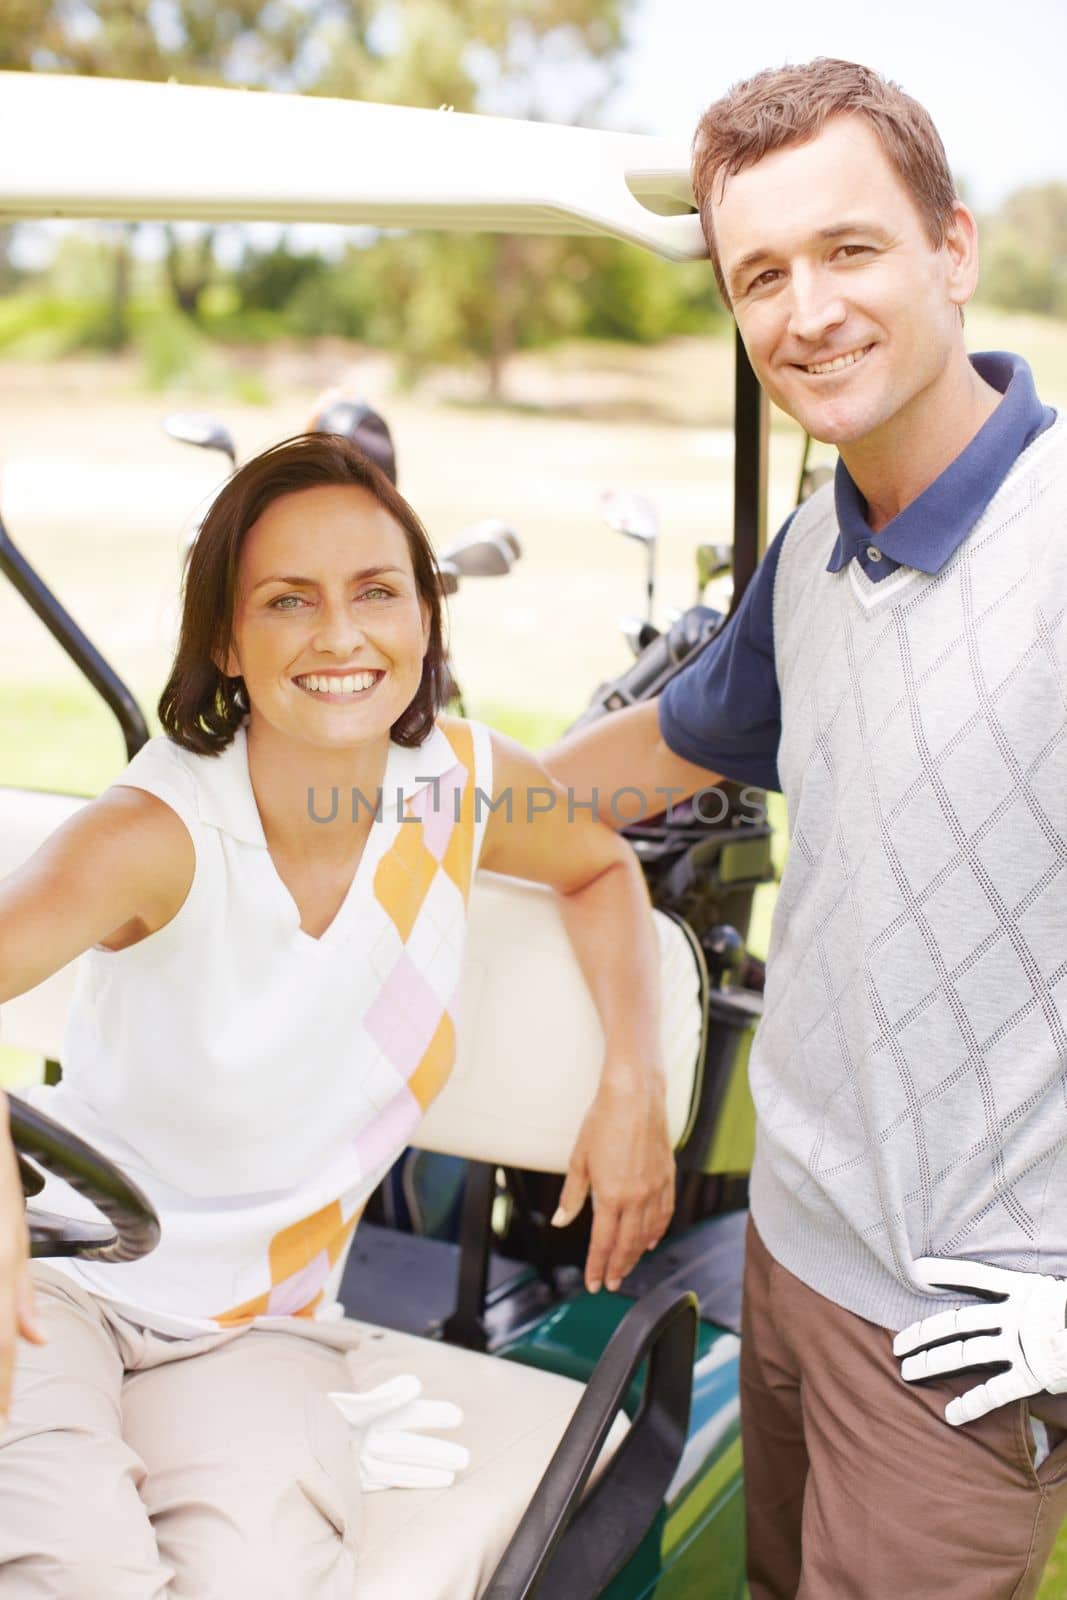 Their love of golf brought them together. Smiling woman seated in a golf cart with her husband standing alongside her